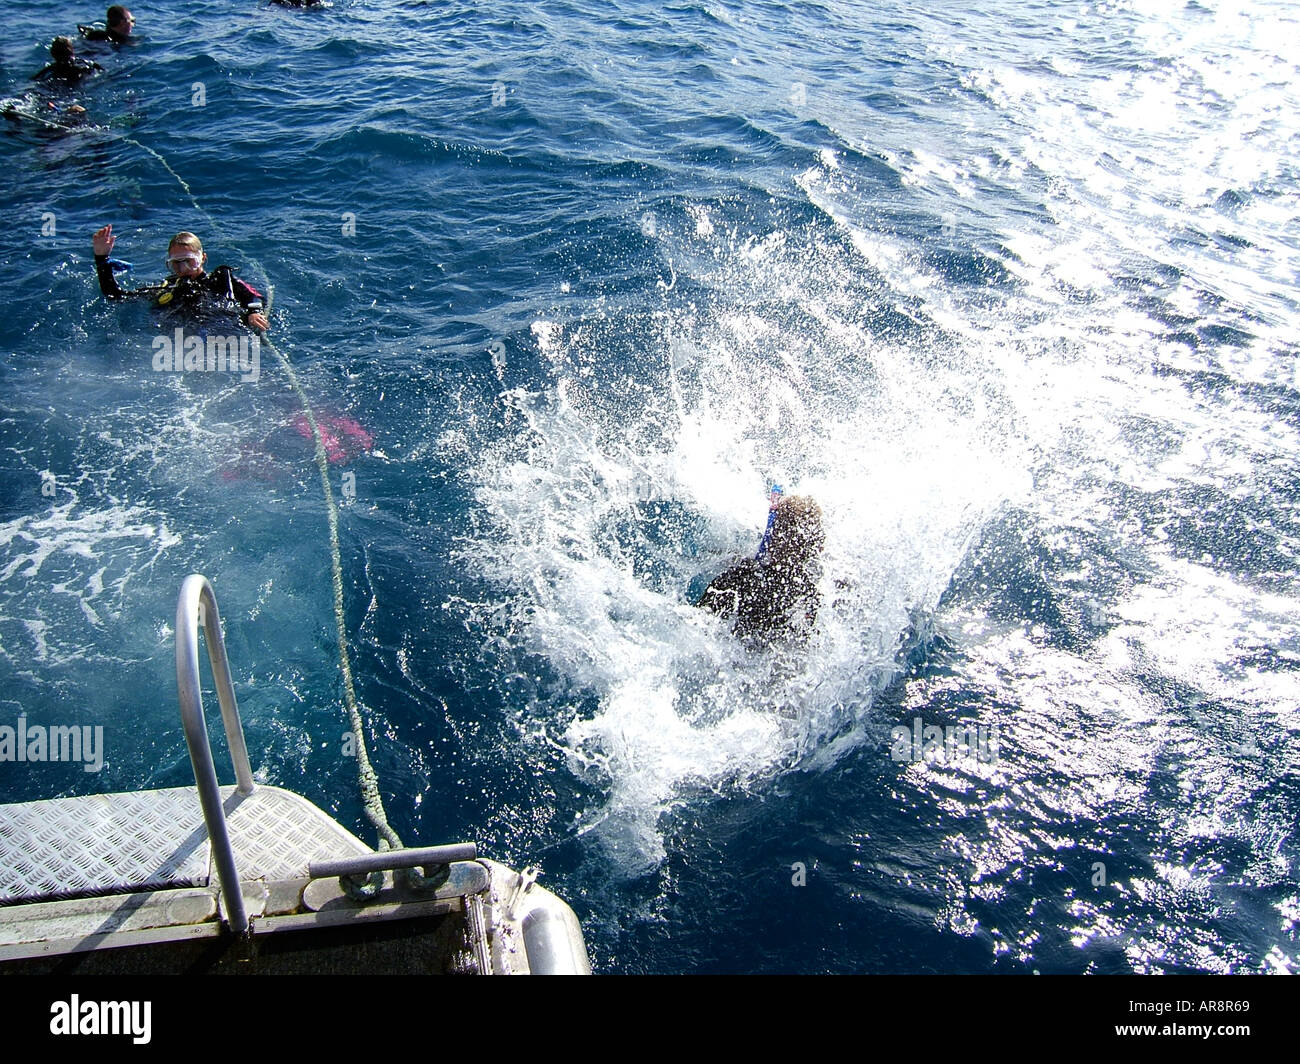 Scuba diver jumping into the water from a dive boat.Coastal waters Sydney Australia Stock Photo